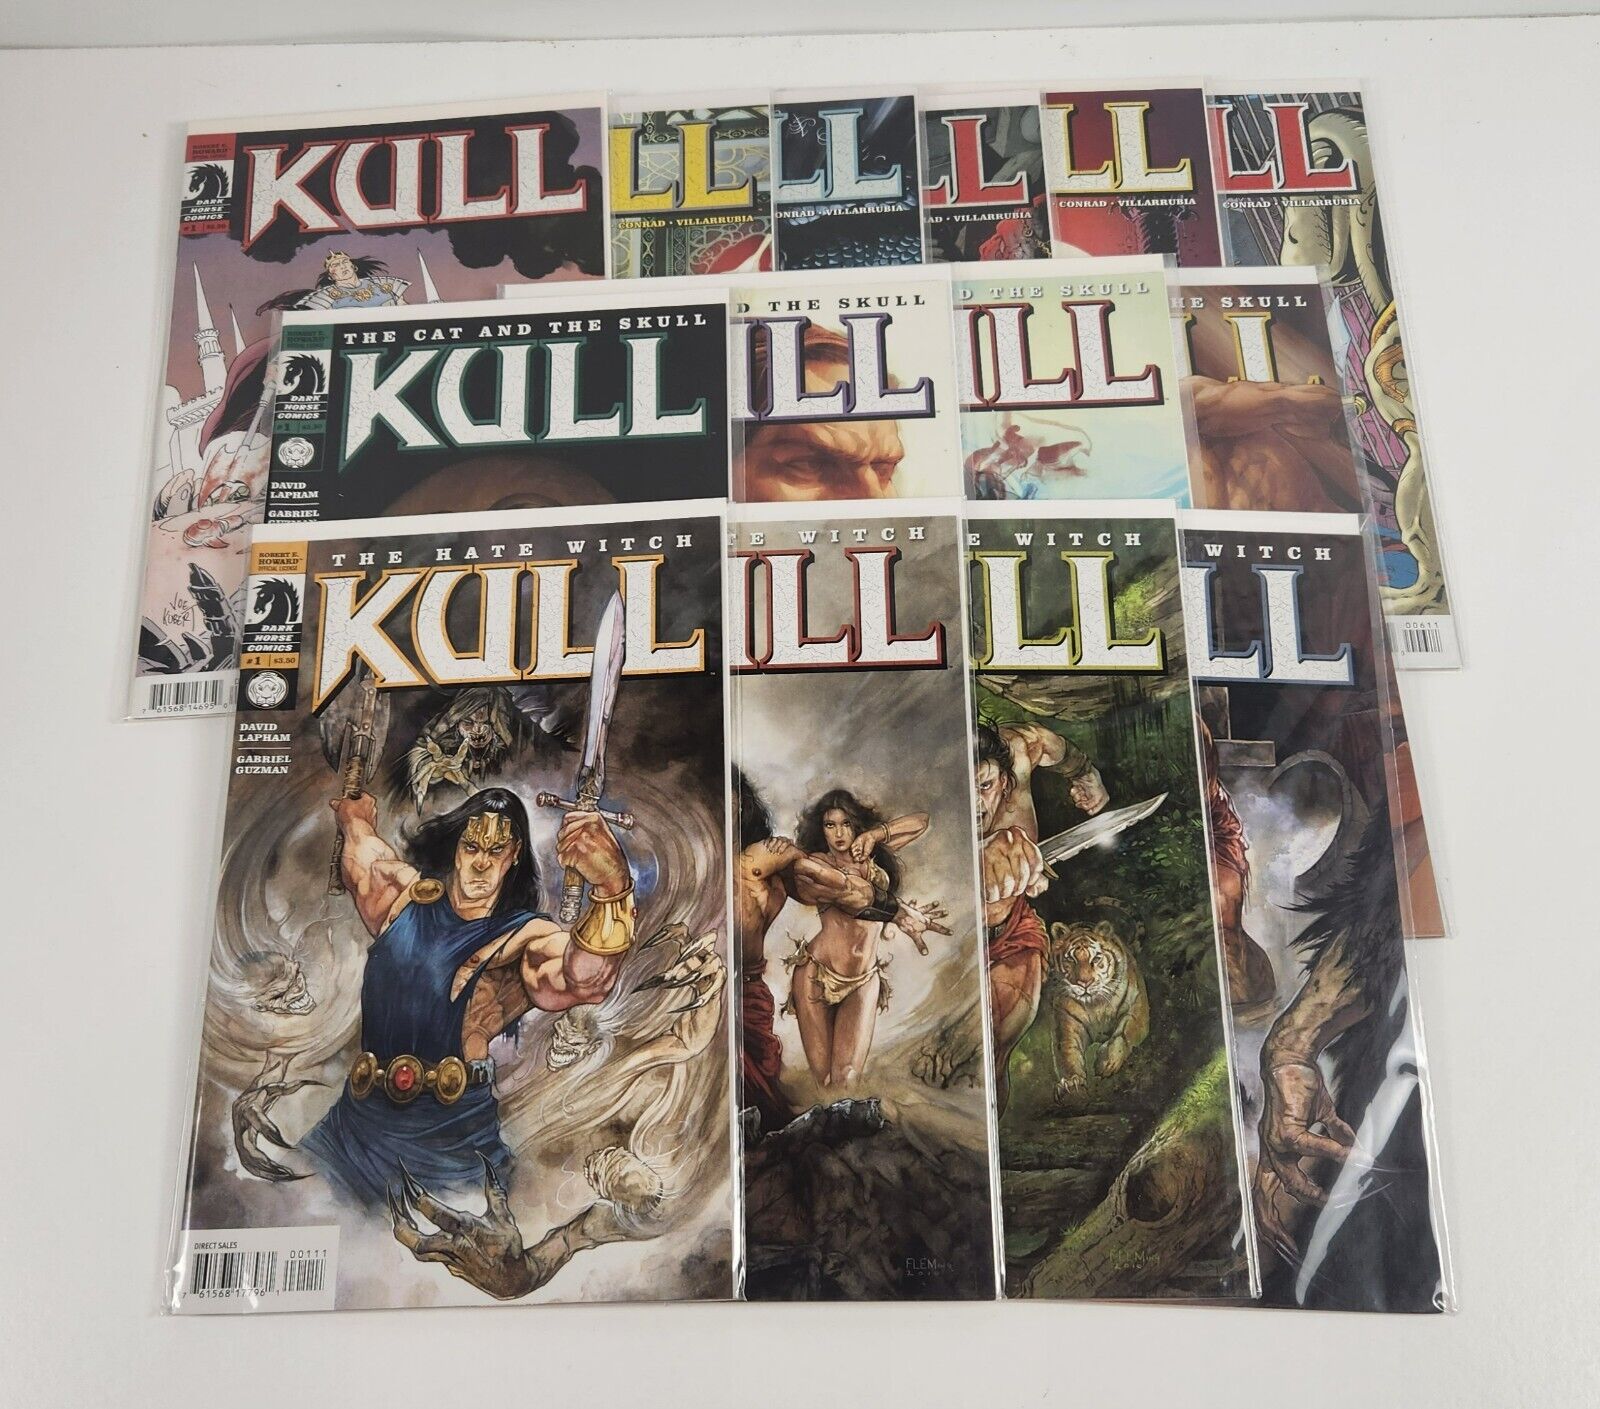 Kull (Dark Horse 2008) #1-6 Cat and the Skull #1-4 The Hate Witch #1-4, Sets